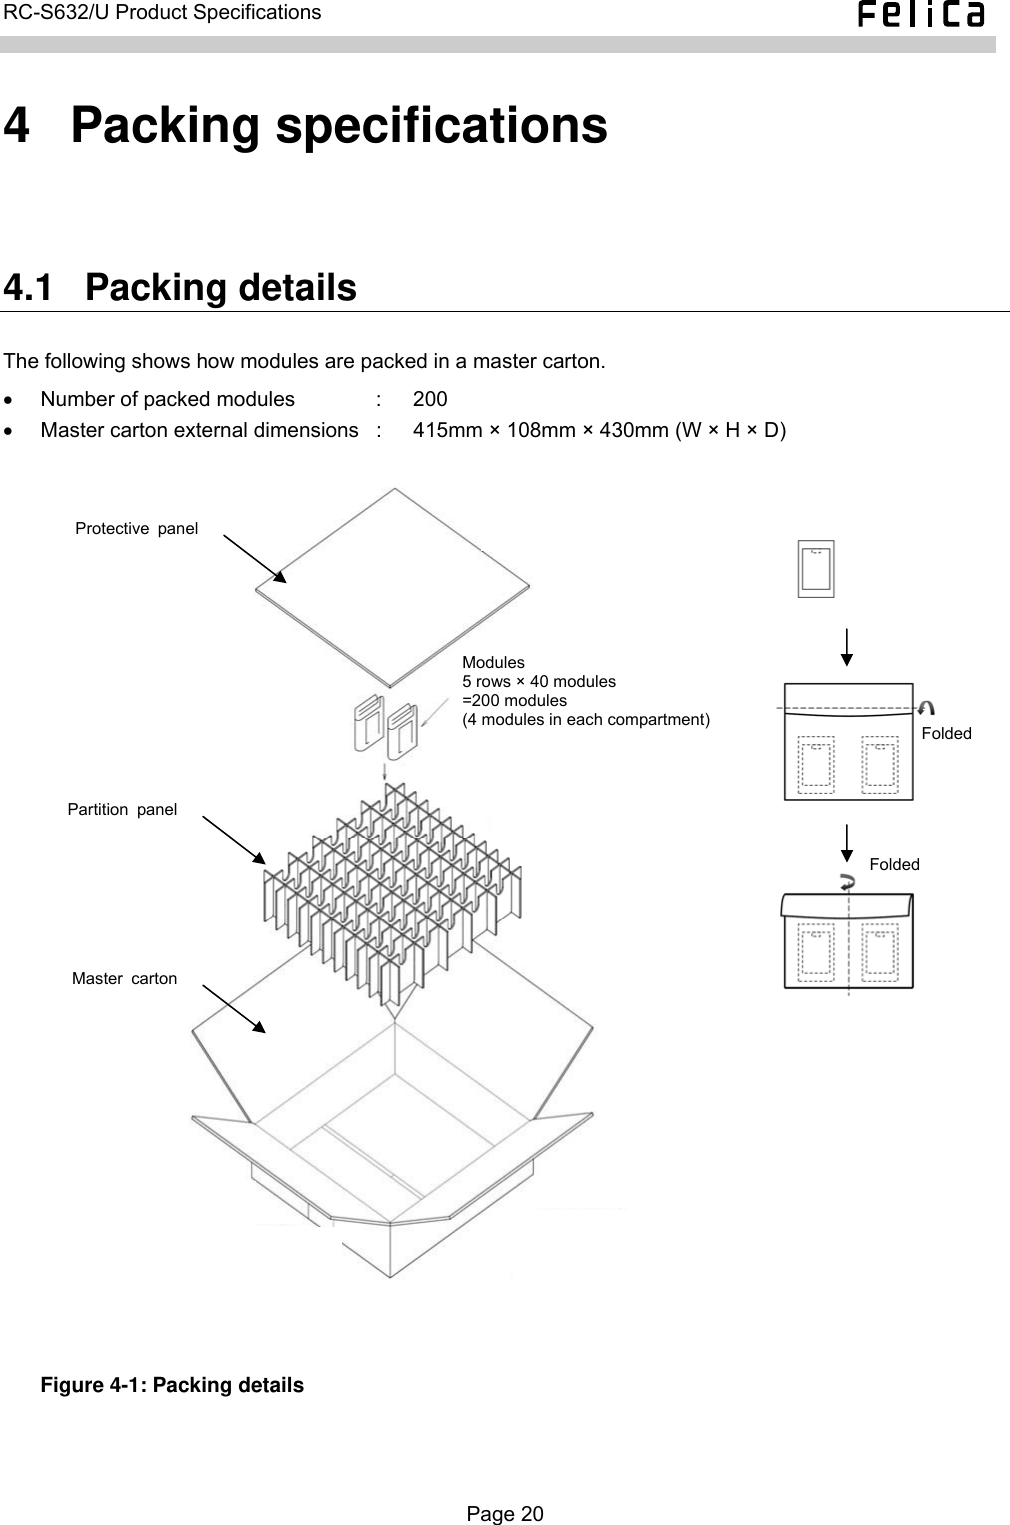   RC-S632/U Product Specifications  4  Packing specifications 4.1  Packing details The following shows how modules are packed in a master carton. •  Number of packed modules     :  200 •  Master carton external dimensions  :  415mm × 108mm × 430mm (W × H × D)  Partition panel Folded Folded  Protective panel Modules 5 rows × 40 modules =200 modules (4 modules in each compartment) Master carton  Figure 4-1: Packing details  Page 20  